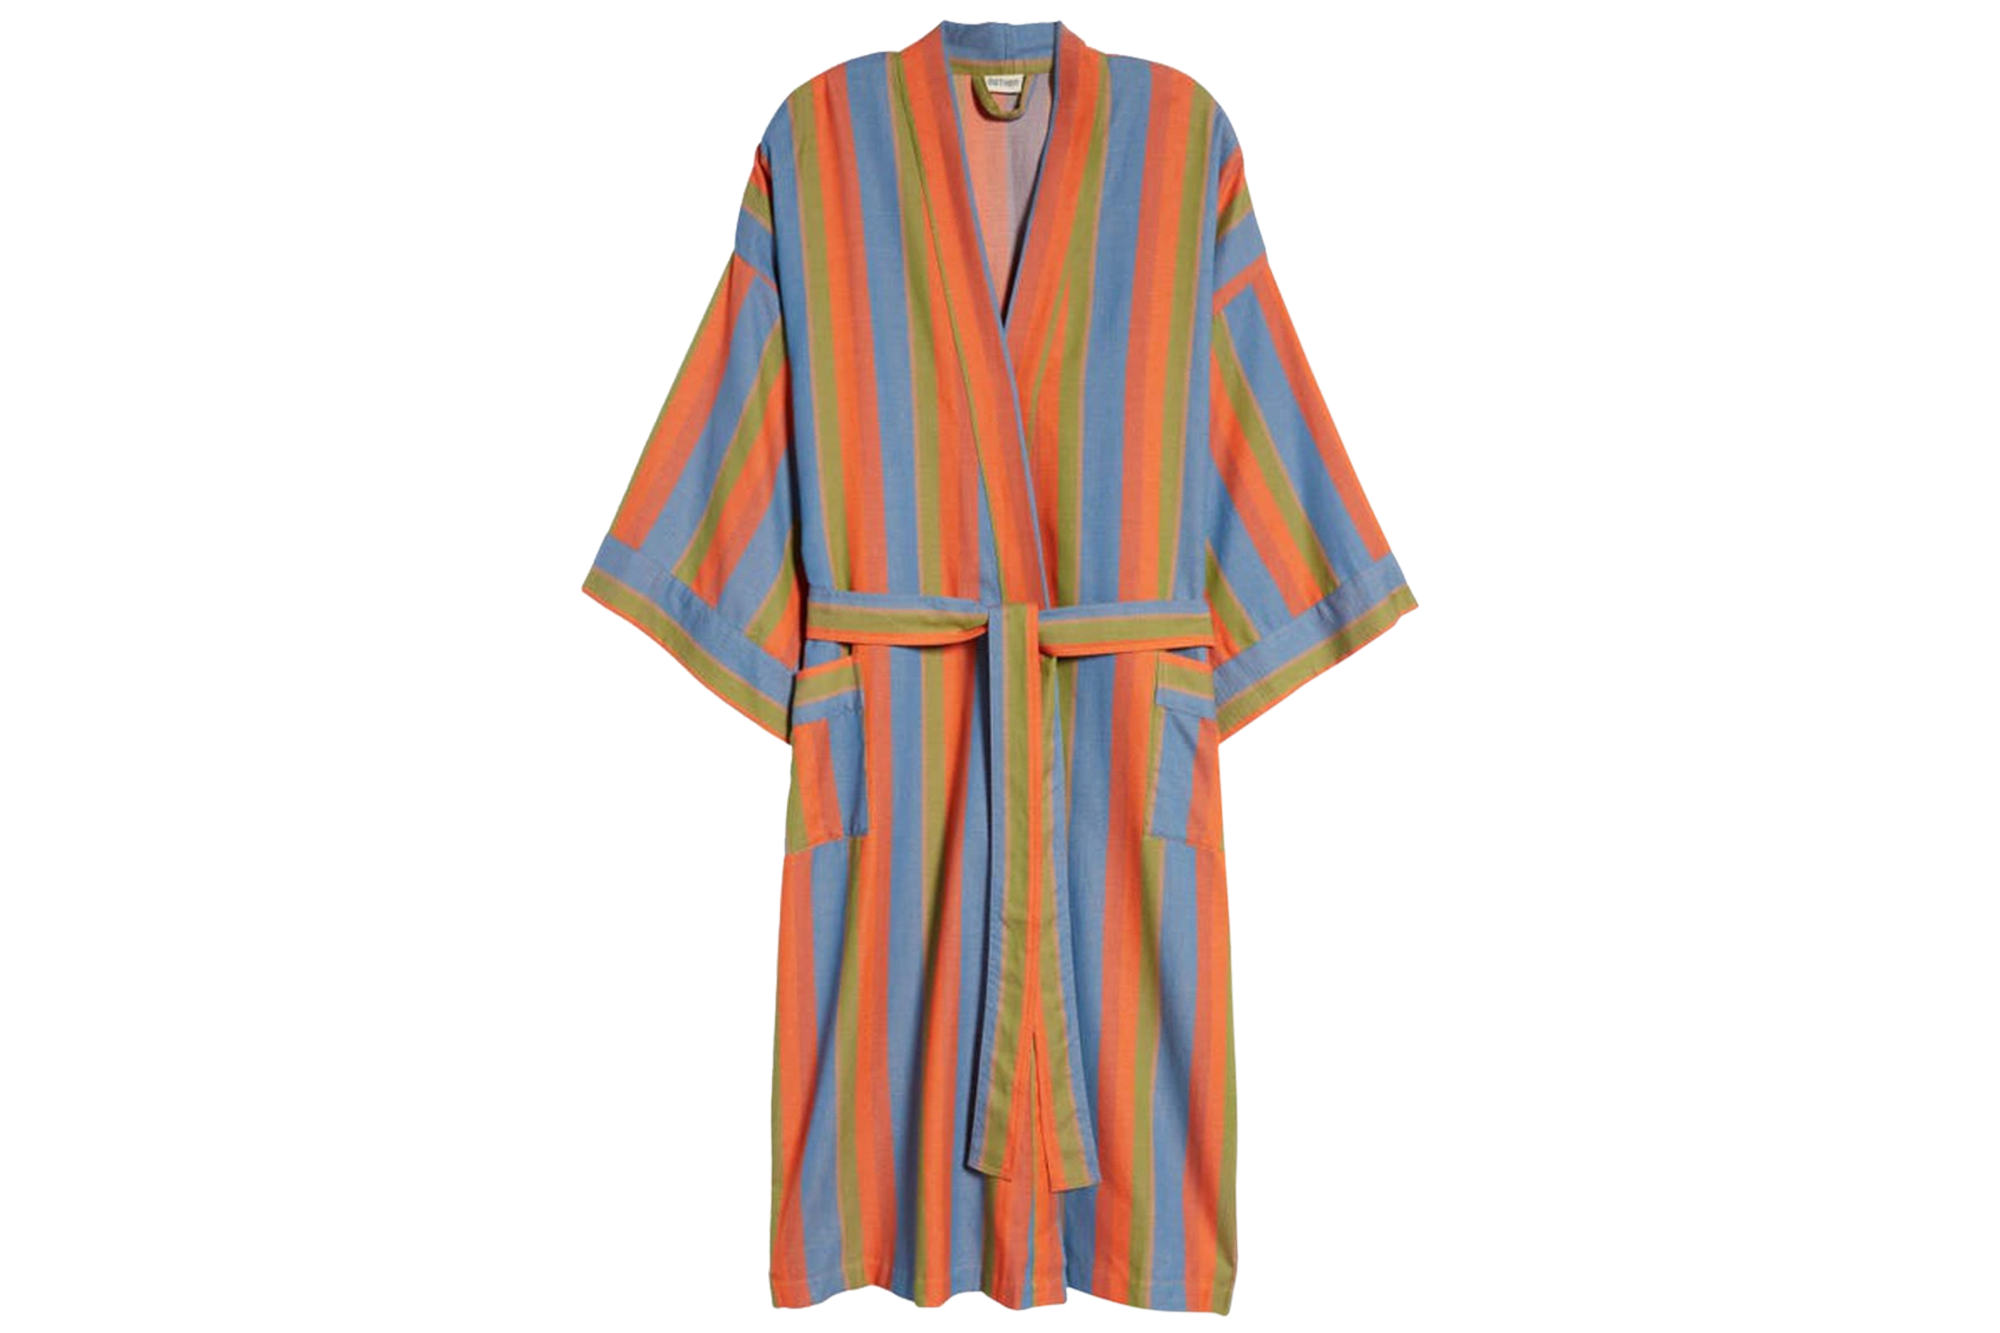 A colorful robe from Bathen